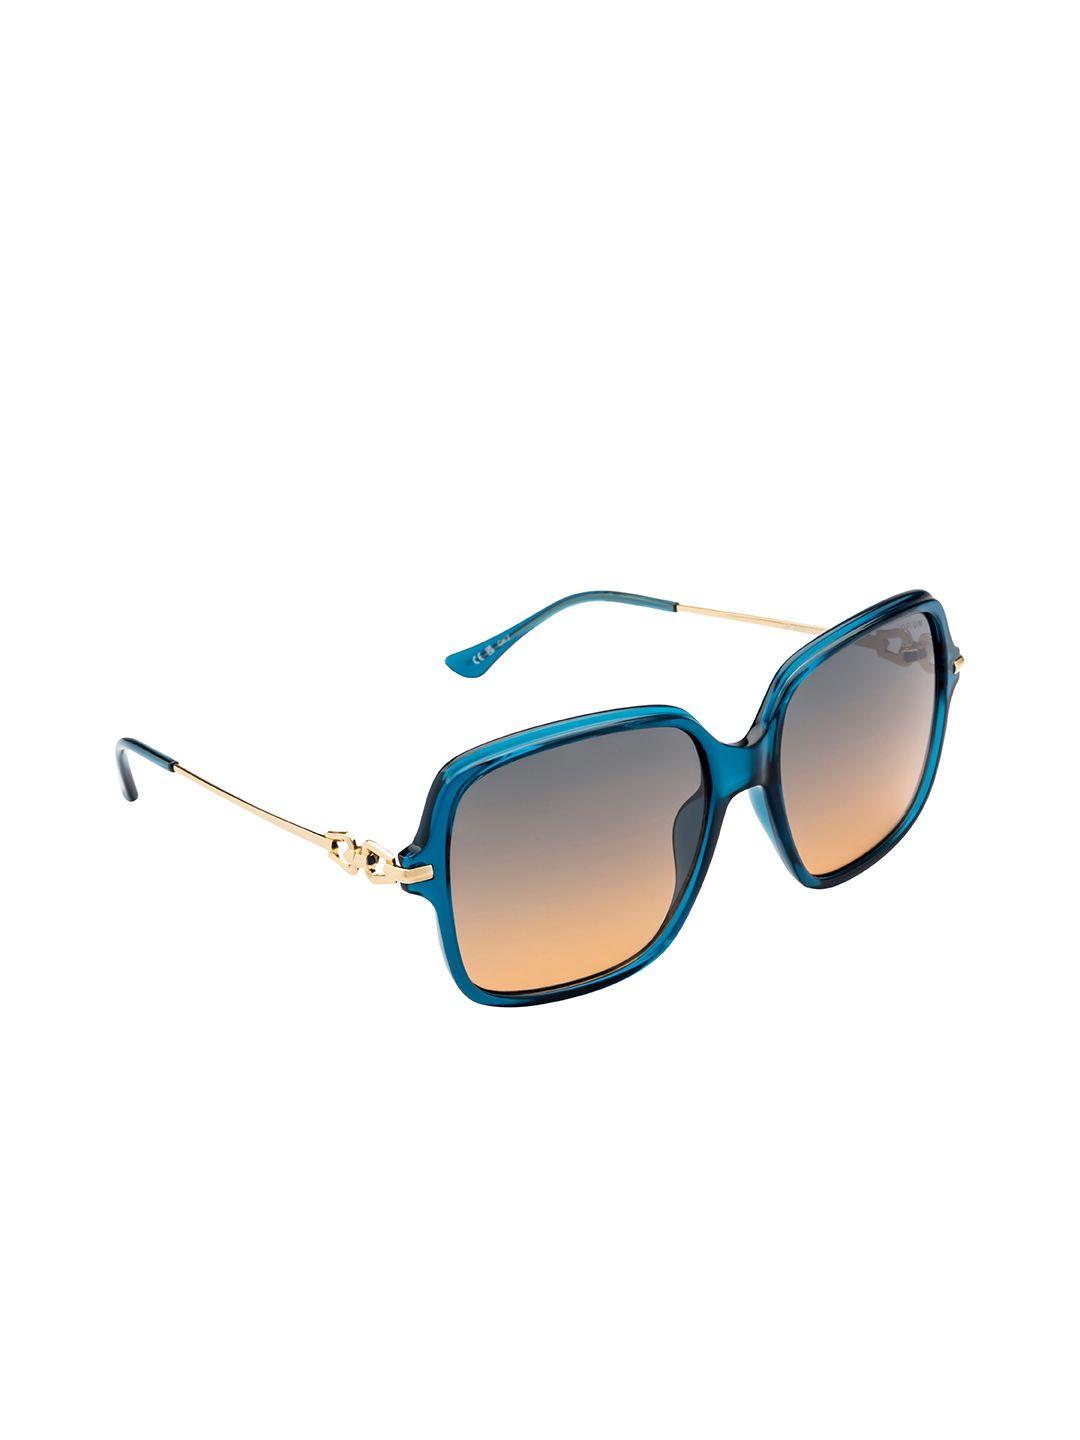 opium women square sunglasses with uv protected lens op-10167-c04-55